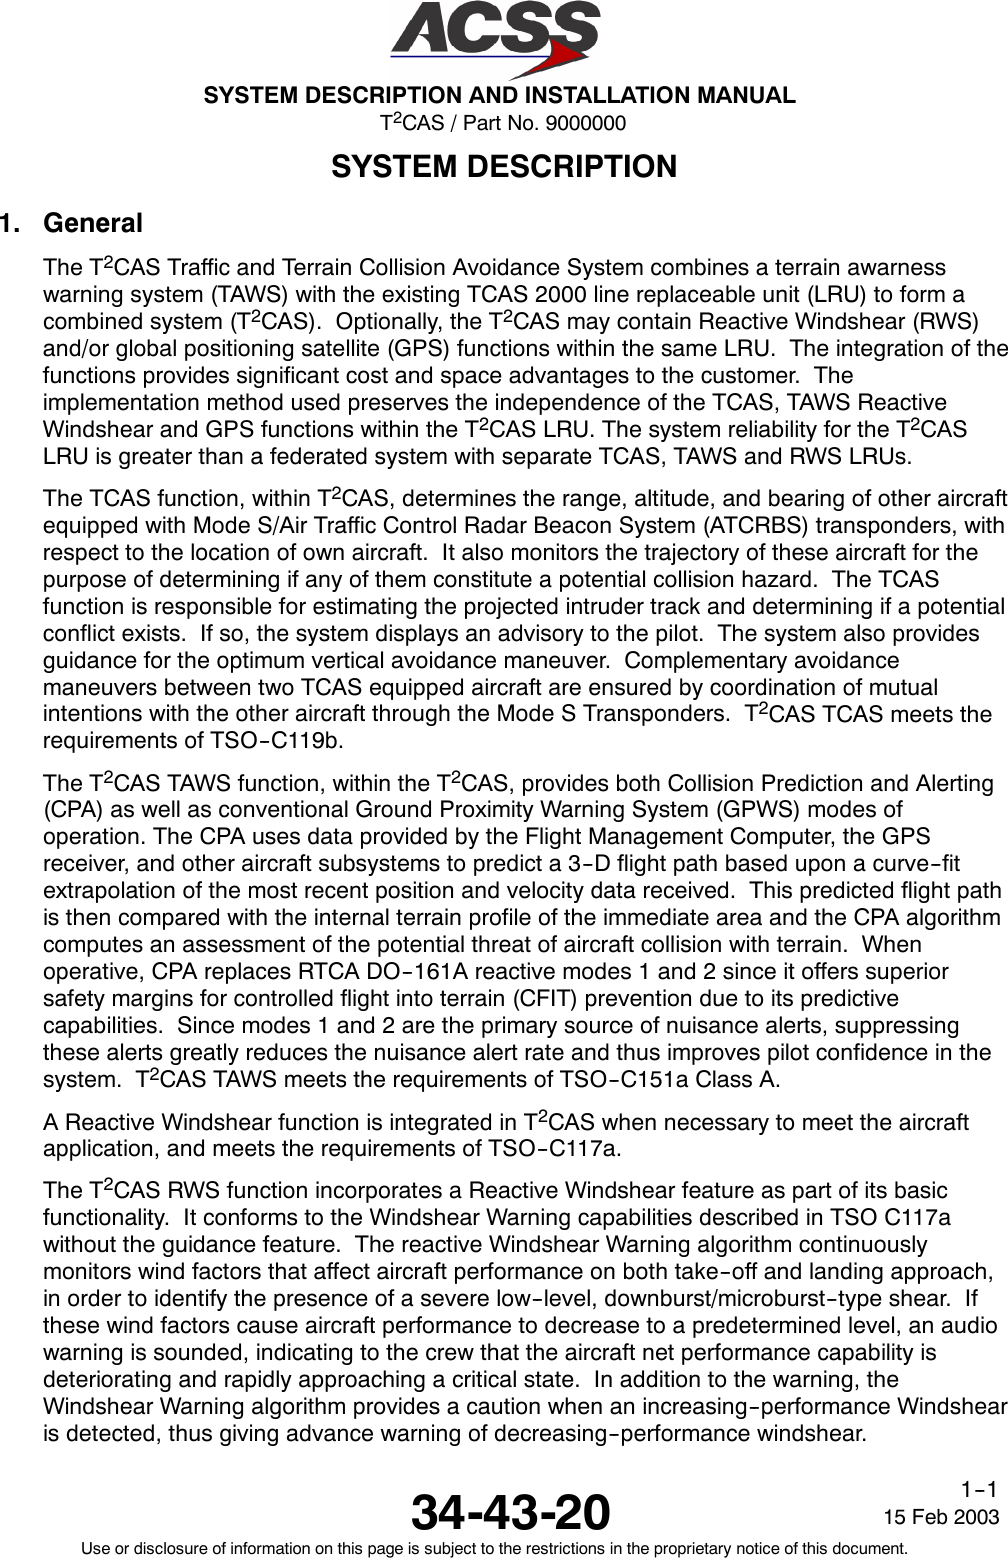 T2CAS / Part No. 9000000SYSTEM DESCRIPTION AND INSTALLATION MANUAL34-43-20 15 Feb 2003Use or disclosure of information on this page is subject to the restrictions in the proprietary notice of this document.1--1SYSTEM DESCRIPTION1. GeneralThe T2CAS Traffic and Terrain Collision Avoidance System combines a terrain awarnesswarning system (TAWS) with the existing TCAS 2000 line replaceable unit (LRU) to form acombined system (T2CAS). Optionally, the T2CAS may contain Reactive Windshear (RWS)and/or global positioning satellite (GPS) functions within the same LRU. The integration of thefunctions provides significant cost and space advantages to the customer. Theimplementation method used preserves the independence of the TCAS, TAWS ReactiveWindshear and GPS functions within the T2CAS LRU. The system reliability for the T2CASLRU is greater than a federated system with separate TCAS, TAWS and RWS LRUs.The TCAS function, within T2CAS, determines the range, altitude, and bearing of other aircraftequipped with Mode S/Air Traffic Control Radar Beacon System (ATCRBS) transponders, withrespect to the location of own aircraft. It also monitors the trajectory of these aircraft for thepurpose of determining if any of them constitute a potential collision hazard. The TCASfunction is responsible for estimating the projected intruder track and determining if a potentialconflict exists. If so, the system displays an advisory to the pilot. The system also providesguidance for the optimum vertical avoidance maneuver. Complementary avoidancemaneuvers between two TCAS equipped aircraft are ensured by coordination of mutualintentions with the other aircraft through the Mode S Transponders. T2CAS TCAS meets therequirements of TSO--C119b.The T2CAS TAWS function, within the T2CAS, provides both Collision Prediction and Alerting(CPA) as well as conventional Ground Proximity Warning System (GPWS) modes ofoperation. The CPA uses data provided by the Flight Management Computer, the GPSreceiver, and other aircraft subsystems to predict a 3--D flight path based upon a curve--fitextrapolation of the most recent position and velocity data received. This predicted flight pathis then compared with the internal terrain profile of the immediate area and the CPA algorithmcomputes an assessment of the potential threat of aircraft collision with terrain. Whenoperative, CPA replaces RTCA DO--161A reactive modes 1 and 2 since it offers superiorsafety margins for controlled flight into terrain (CFIT) prevention due to its predictivecapabilities. Since modes 1 and 2 are the primary source of nuisance alerts, suppressingthese alerts greatly reduces the nuisance alert rate and thus improves pilot confidence in thesystem. T2CAS TAWS meets the requirements of TSO--C151a Class A.A Reactive Windshear function is integrated in T2CAS when necessary to meet the aircraftapplication, and meets the requirements of TSO--C117a.The T2CAS RWS function incorporates a Reactive Windshear feature as part of its basicfunctionality. It conforms to the Windshear Warning capabilities described in TSO C117awithout the guidance feature. The reactive Windshear Warning algorithm continuouslymonitors wind factors that affect aircraft performance on both take--off and landing approach,in order to identify the presence of a severe low--level, downburst/microburst--type shear. Ifthese wind factors cause aircraft performance to decrease to a predetermined level, an audiowarning is sounded, indicating to the crew that the aircraft net performance capability isdeteriorating and rapidly approaching a critical state. In addition to the warning, theWindshear Warning algorithm provides a caution when an increasing--performance Windshearis detected, thus giving advance warning of decreasing--performance windshear.